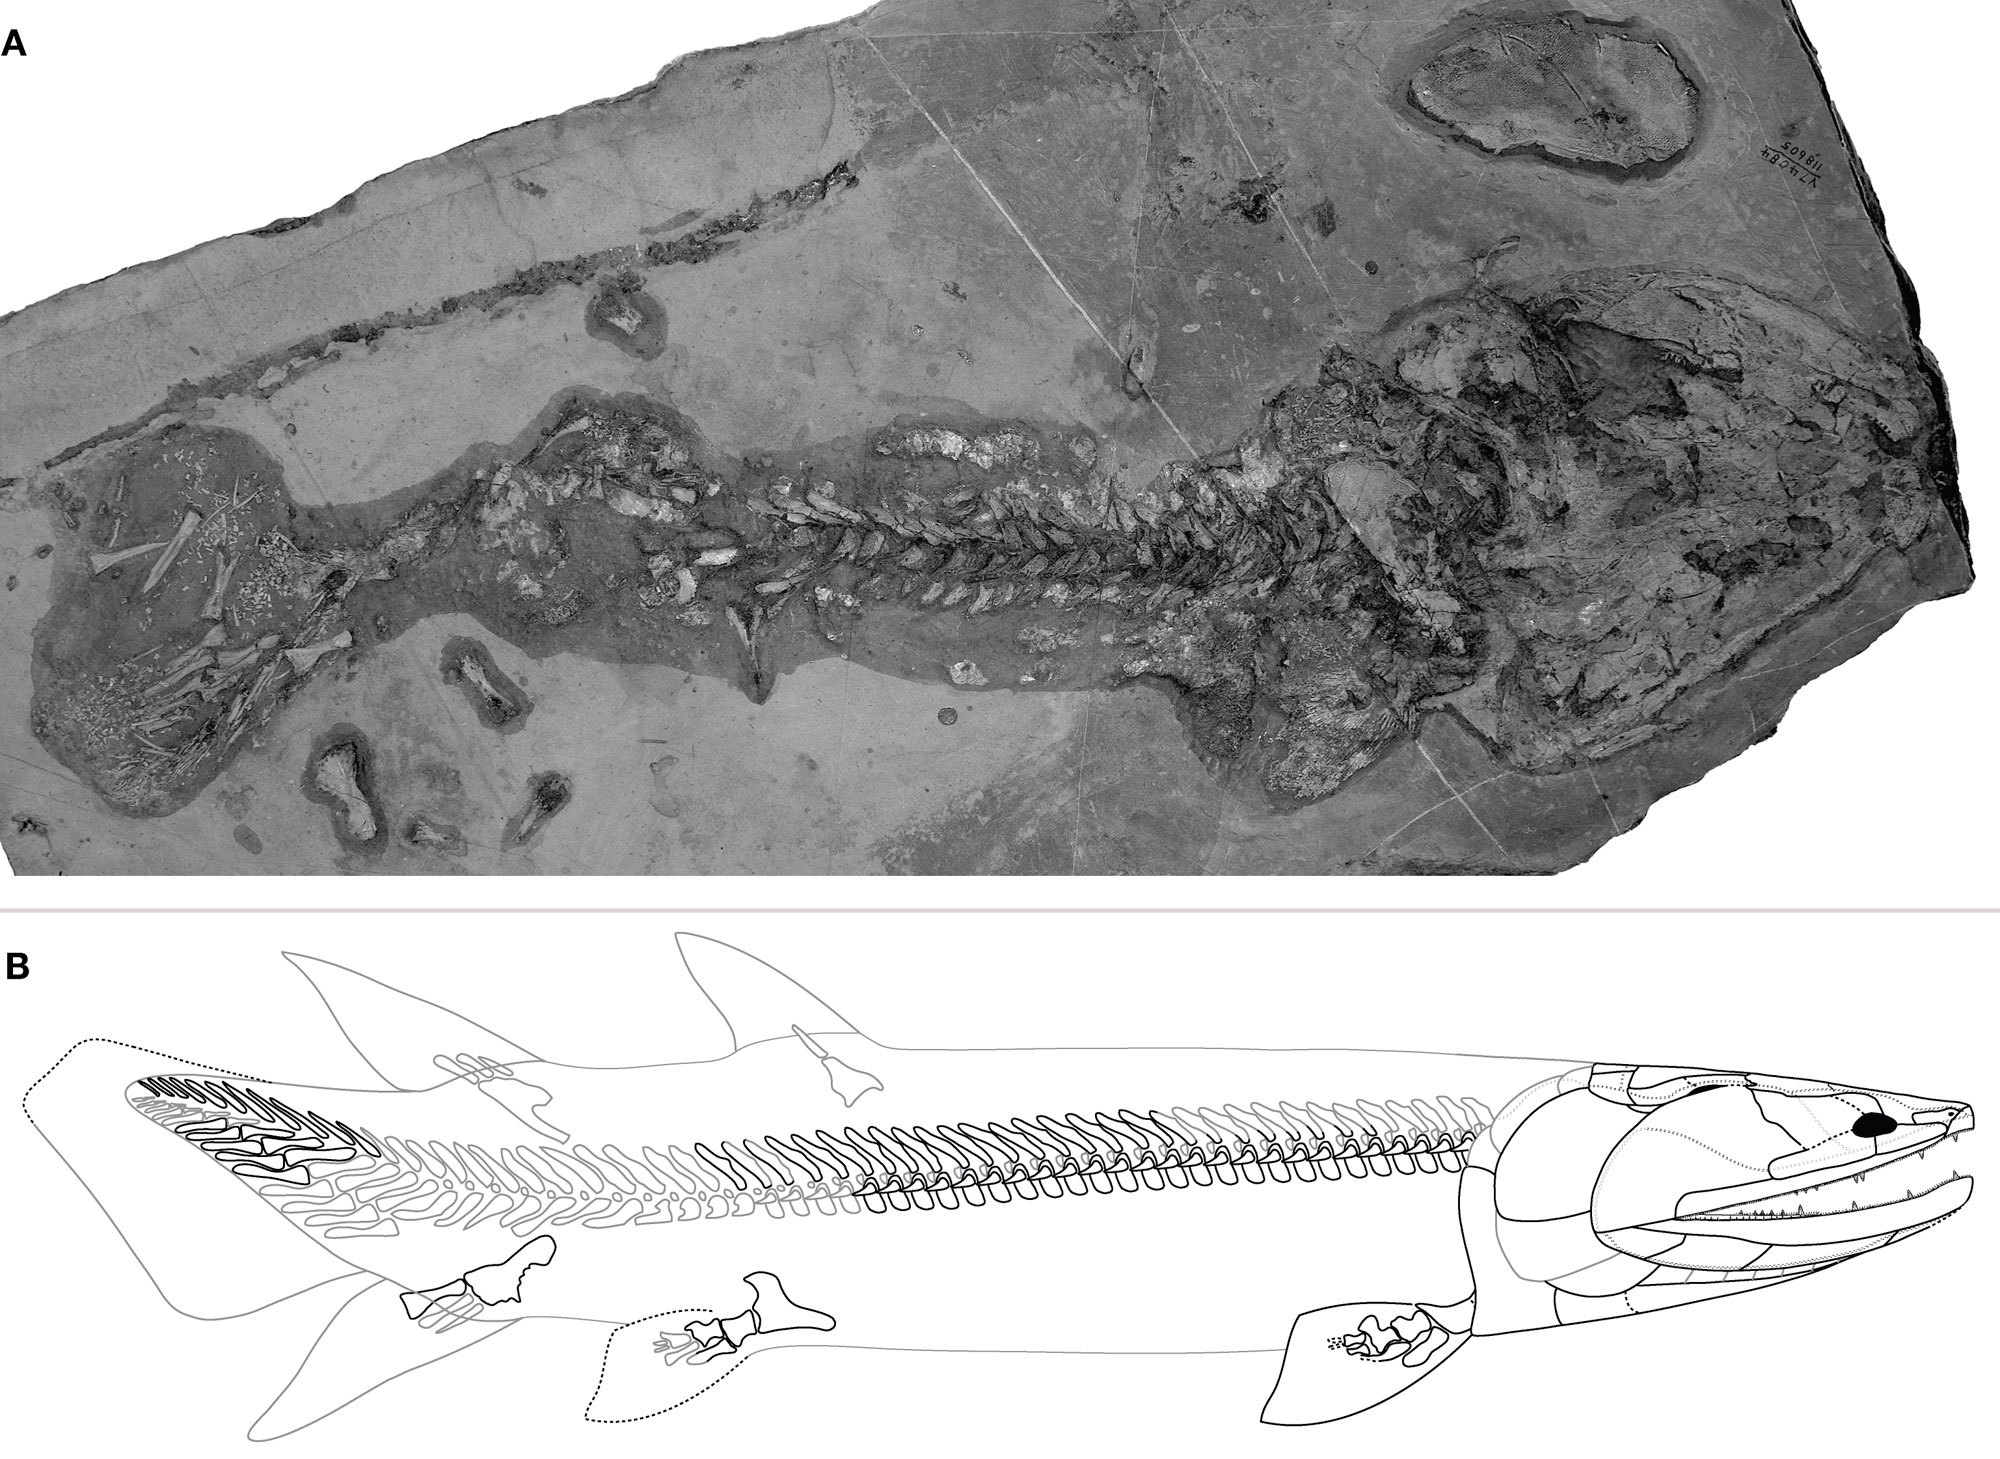 2-Panel image showing the Devonian fish Tinirau clackae from Eureaka County, Nevada. Upper panel: Black and white photograph of fossil fish bones preserved in a slab of rock. The skull is on the right of the image, the tail on the left. Lower panel: Drawing showing an outline of the fish with skeleton reconstructed inside. Bones that were found are outlined in black, bones that are inferred are outlined in gray.